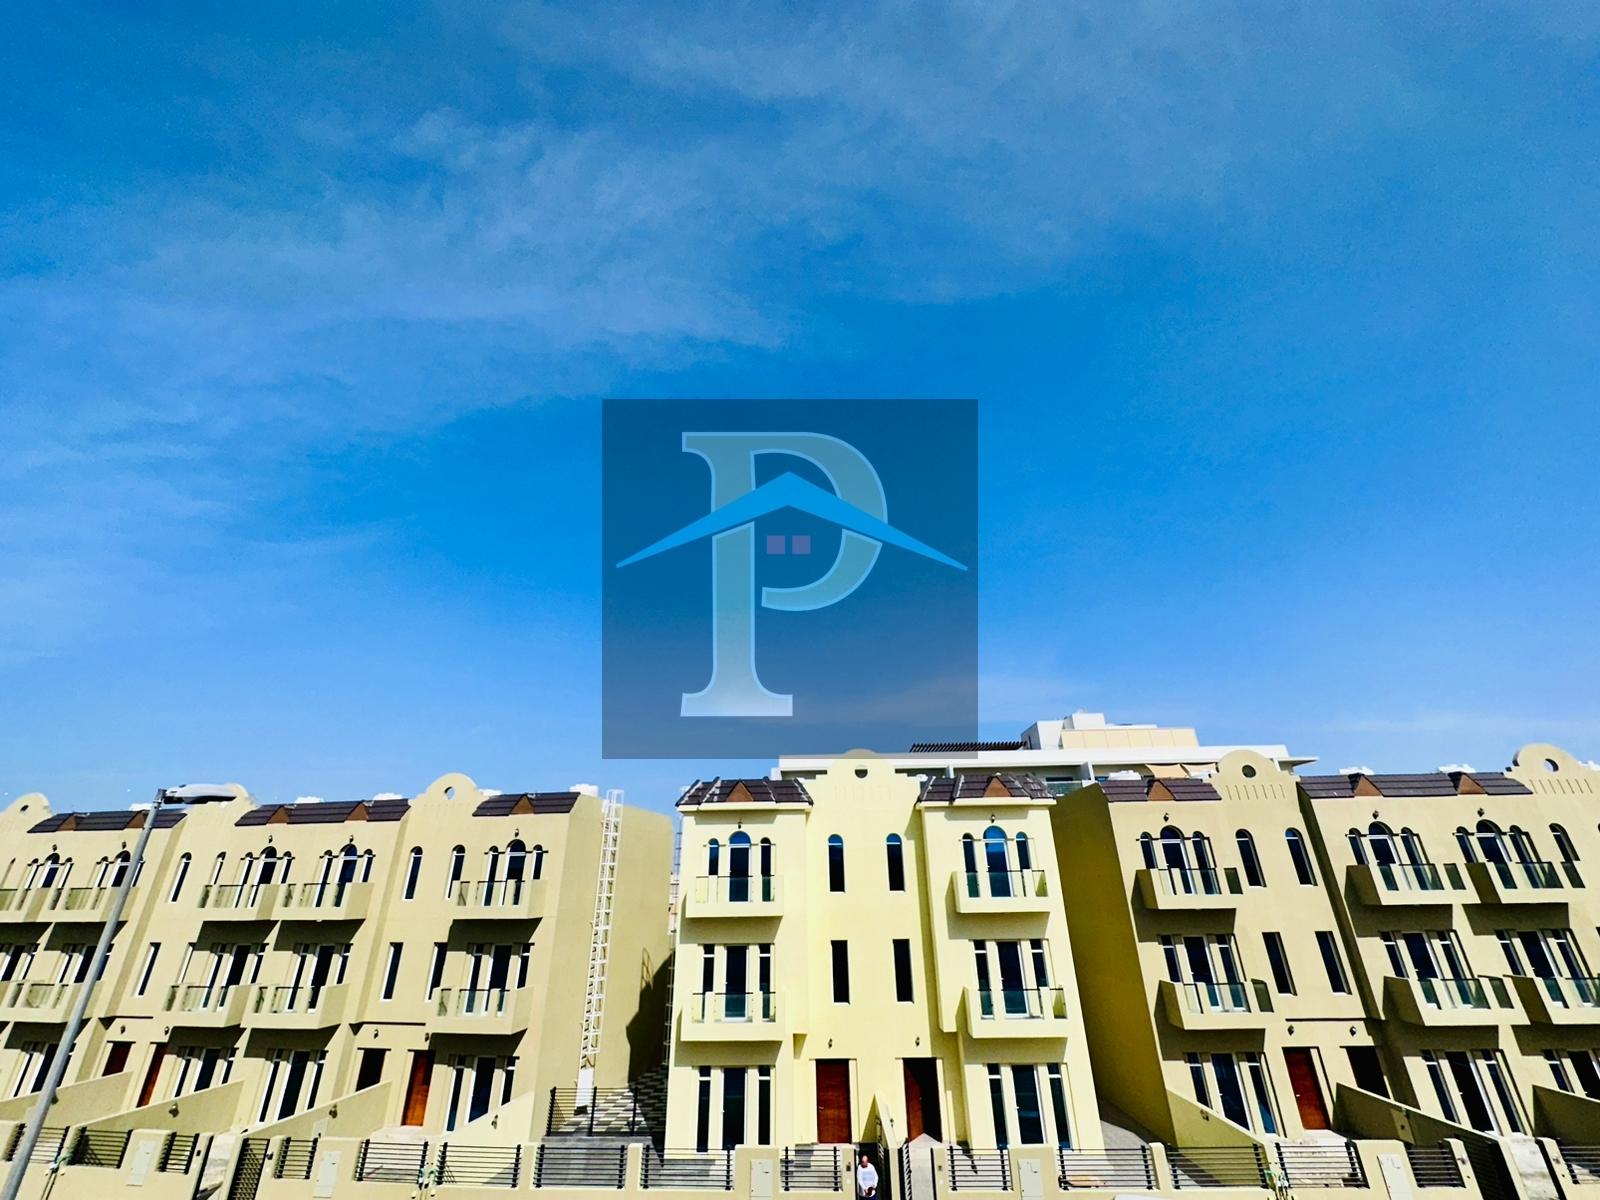 4 bed, 5 bath Villa for rent in Orchid Park, Jumeirah Village Circle, Dubai for price AED 135000 yearly 